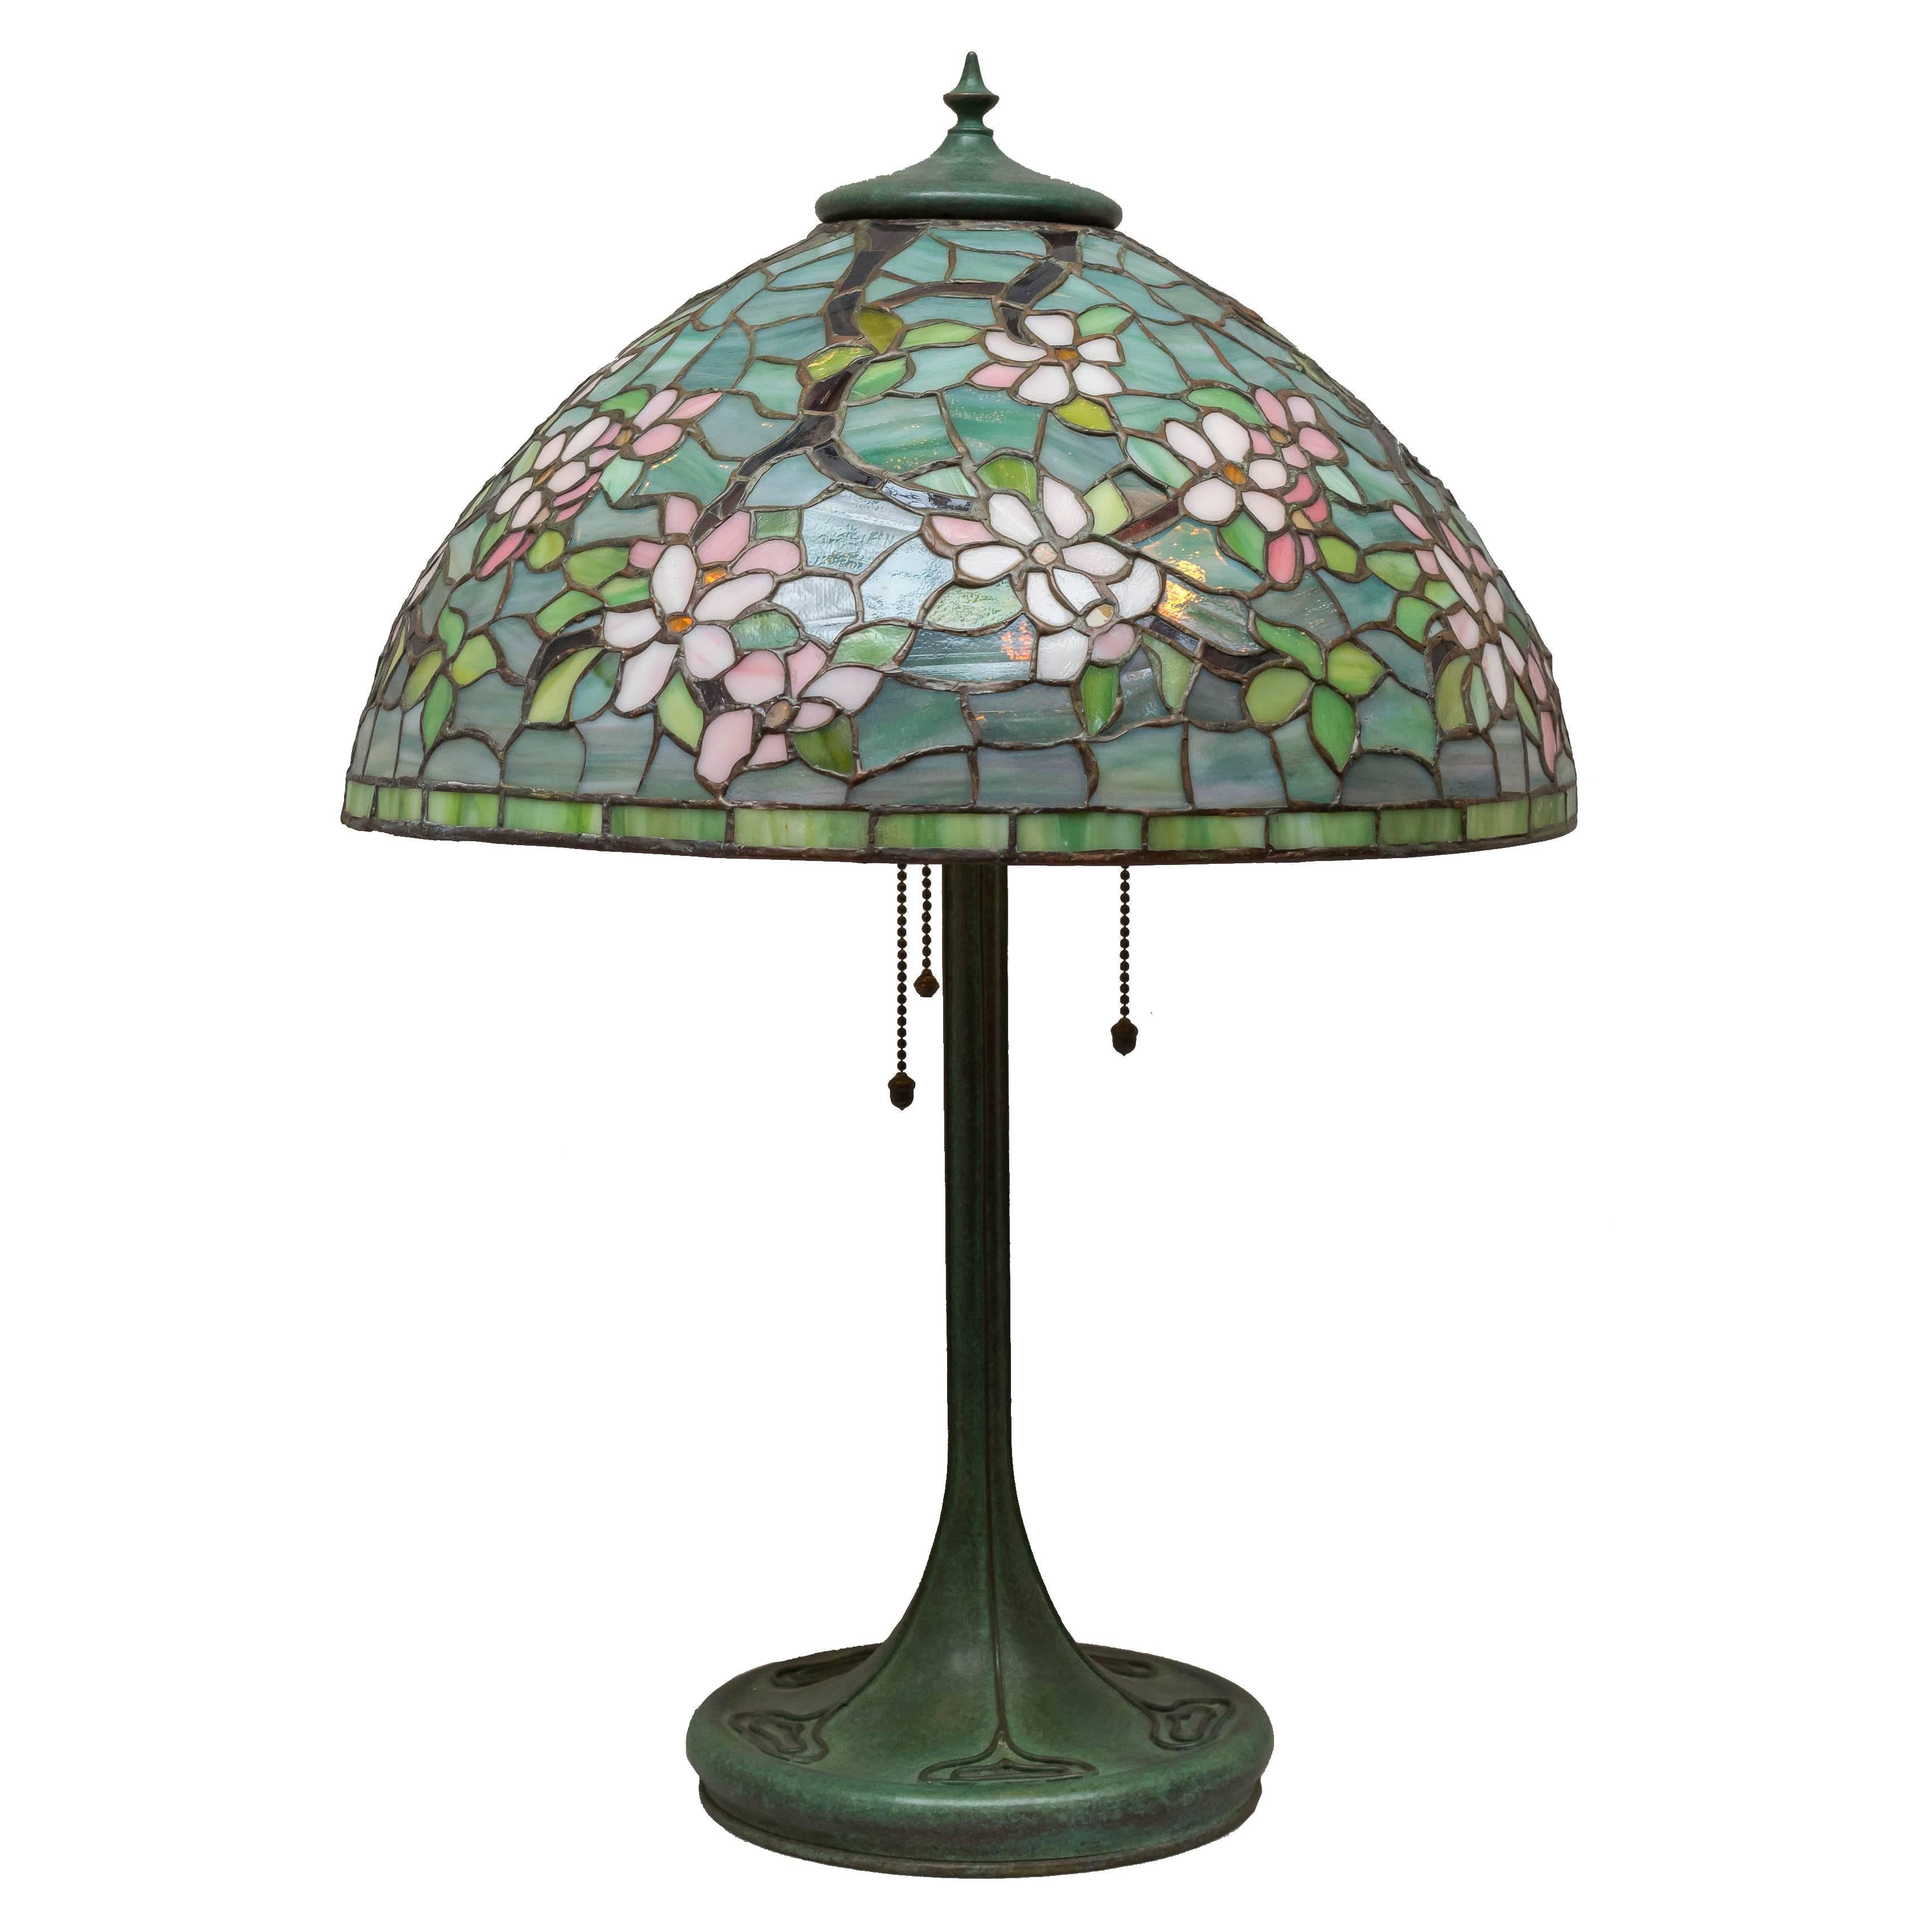 Full Floral "Apple Blossom" Leaded Glass Table Lamp by Unique Art Glass Co